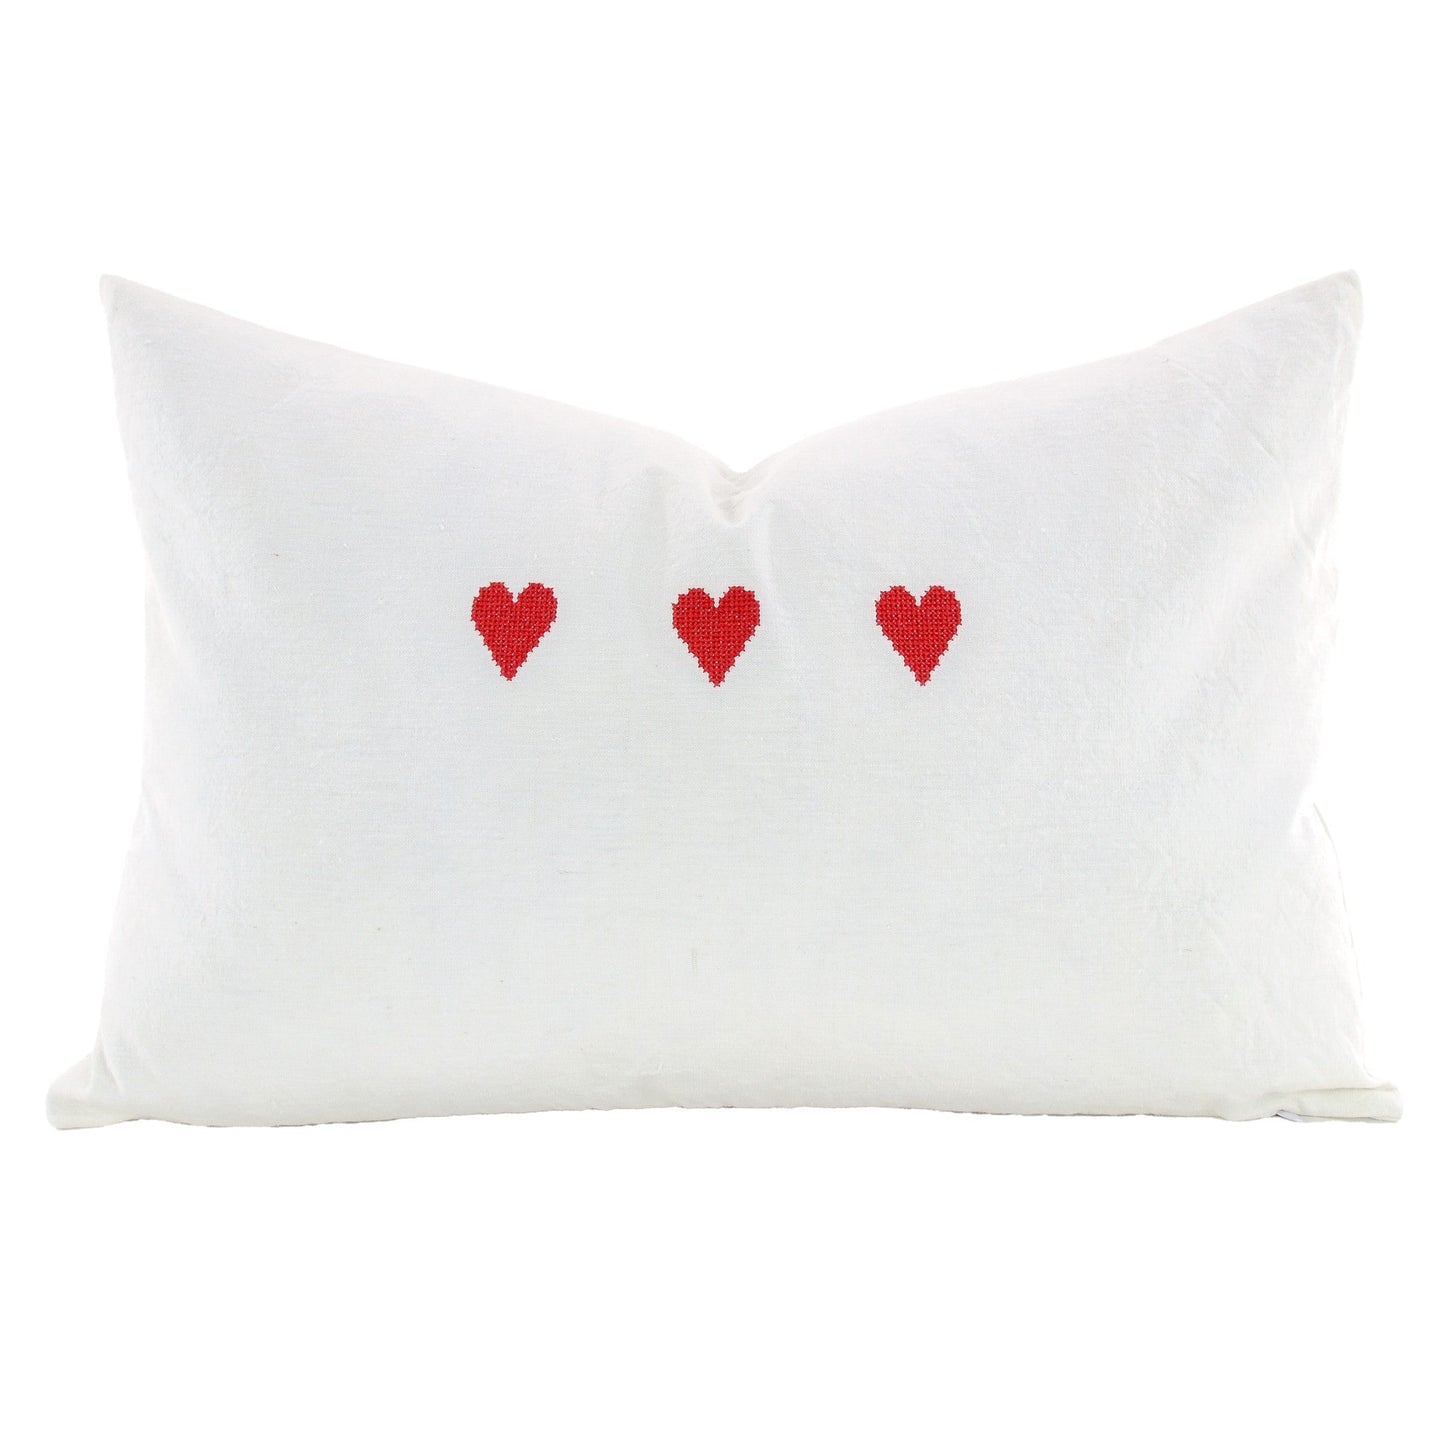 Front of pillow made from vintage European white linen and embroidered with three red hearts